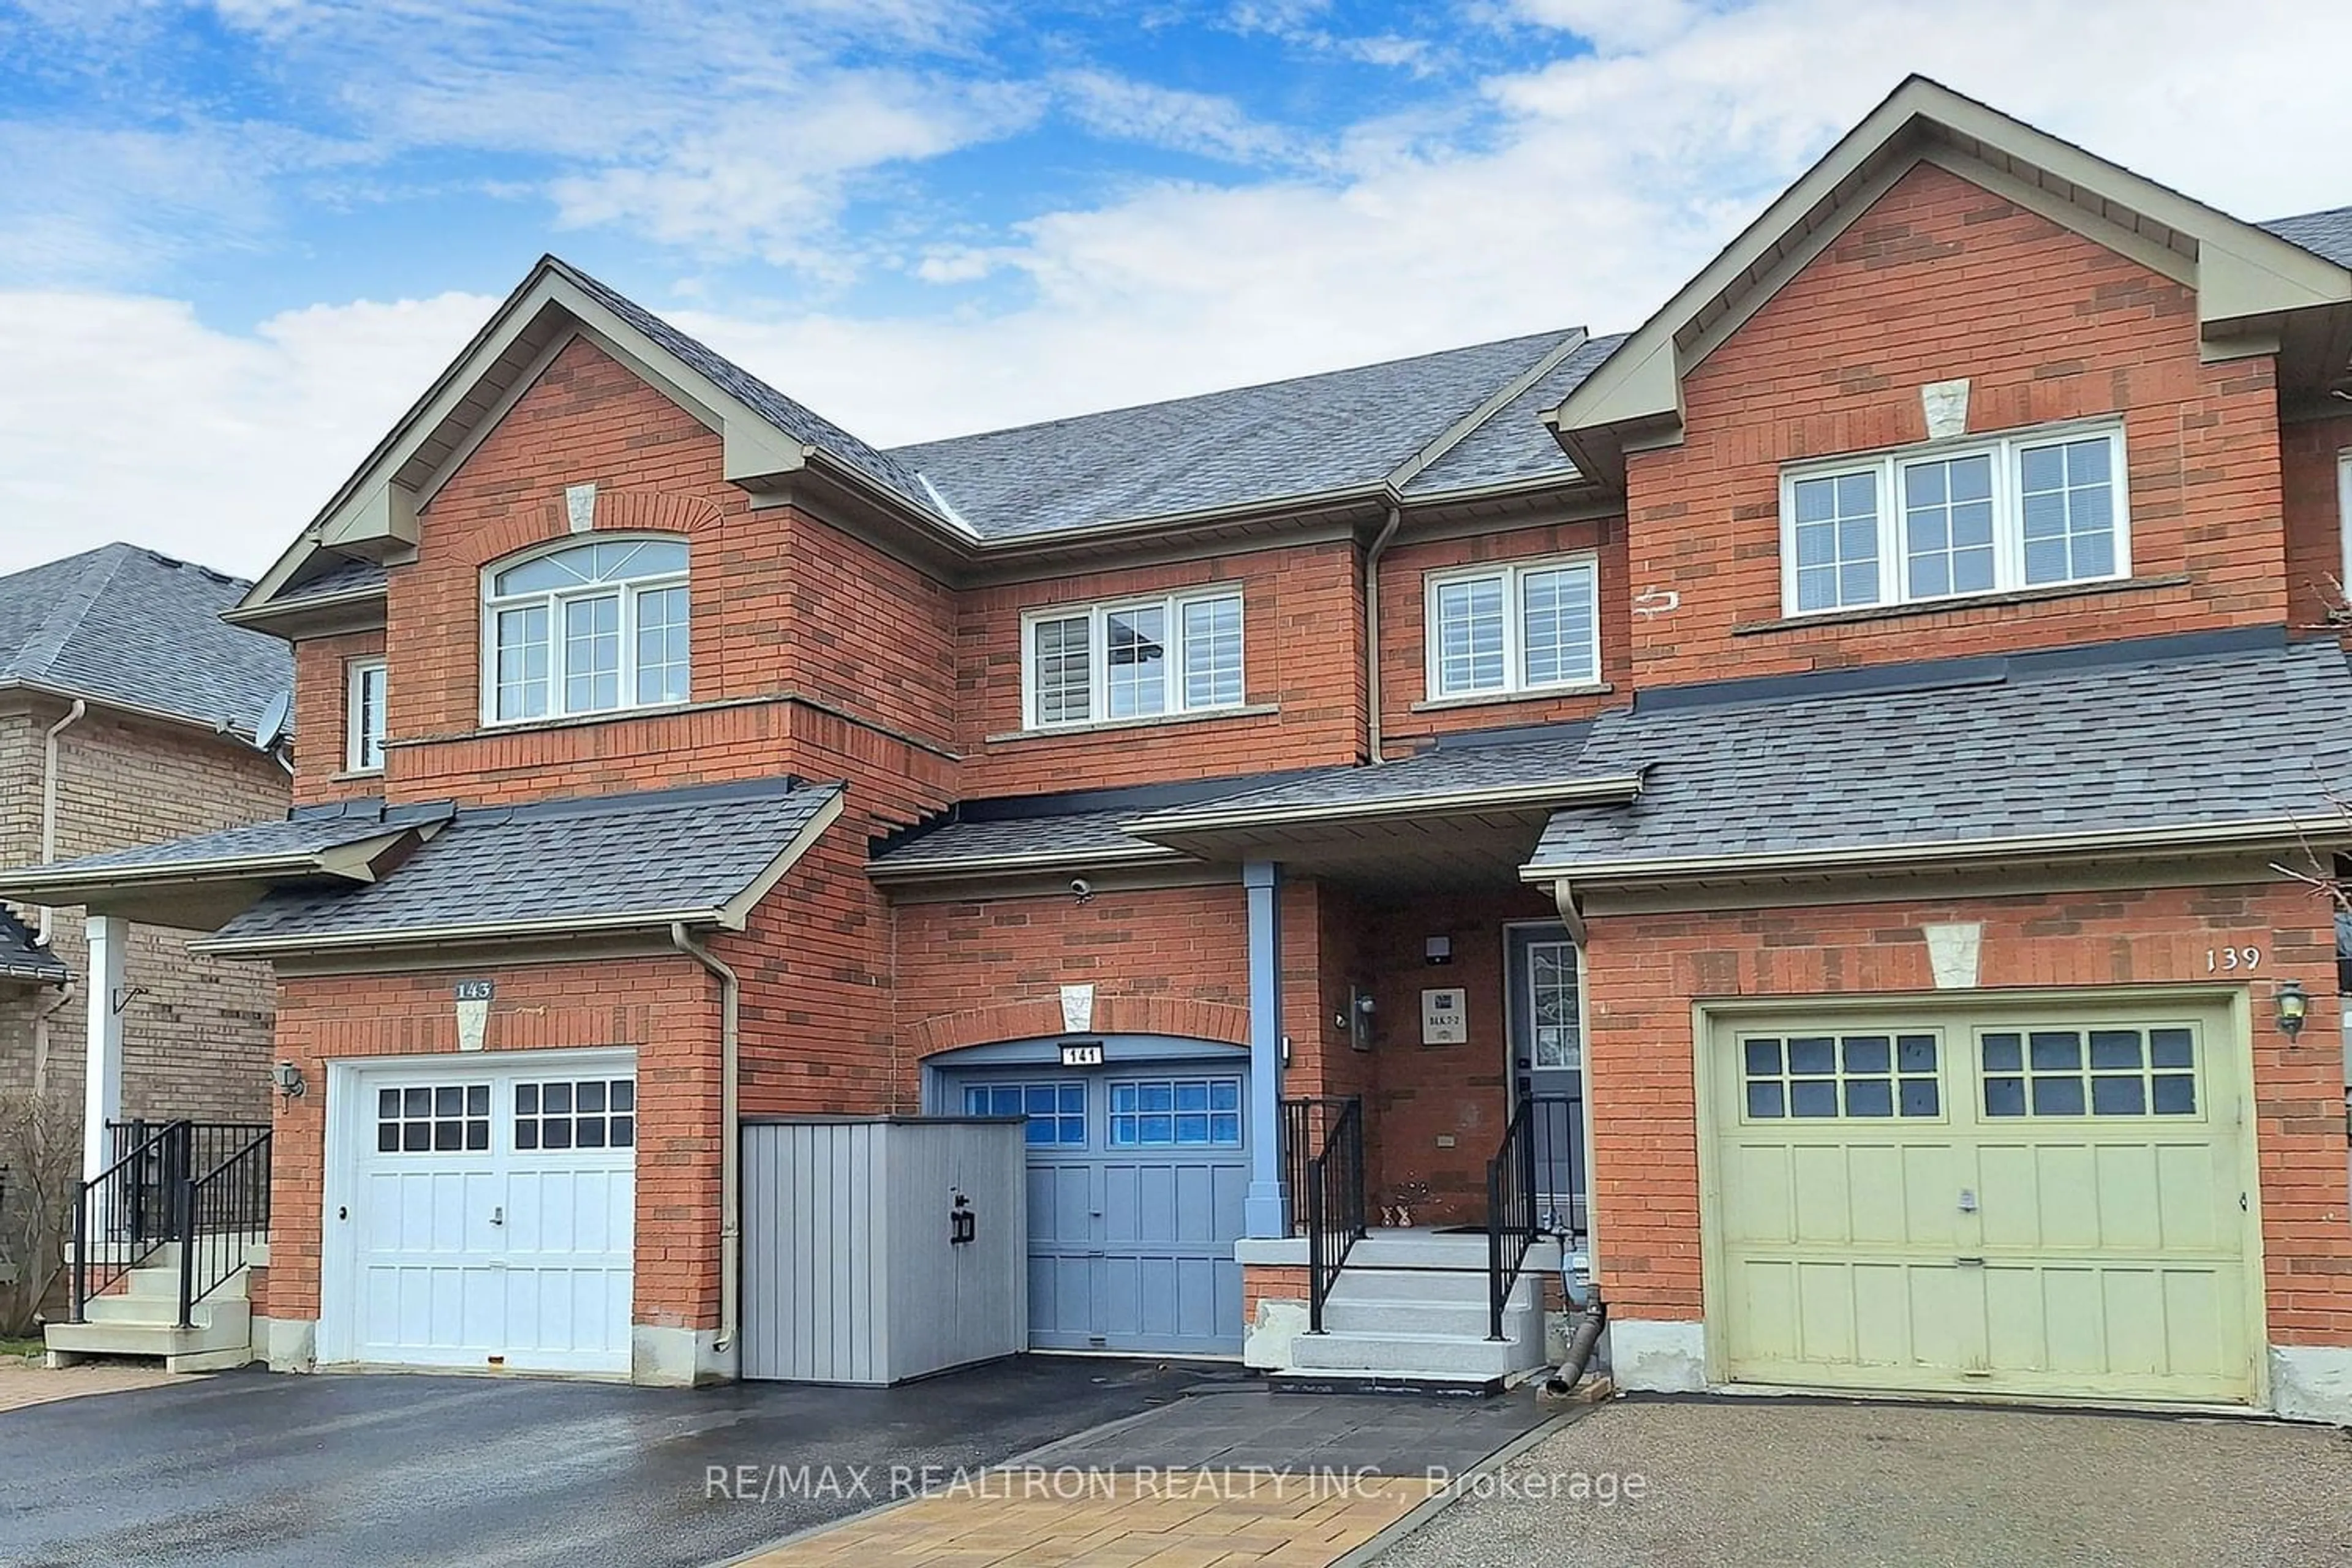 Home with brick exterior material for 141 Amulet Cres, Richmond Hill Ontario L4S 2T5